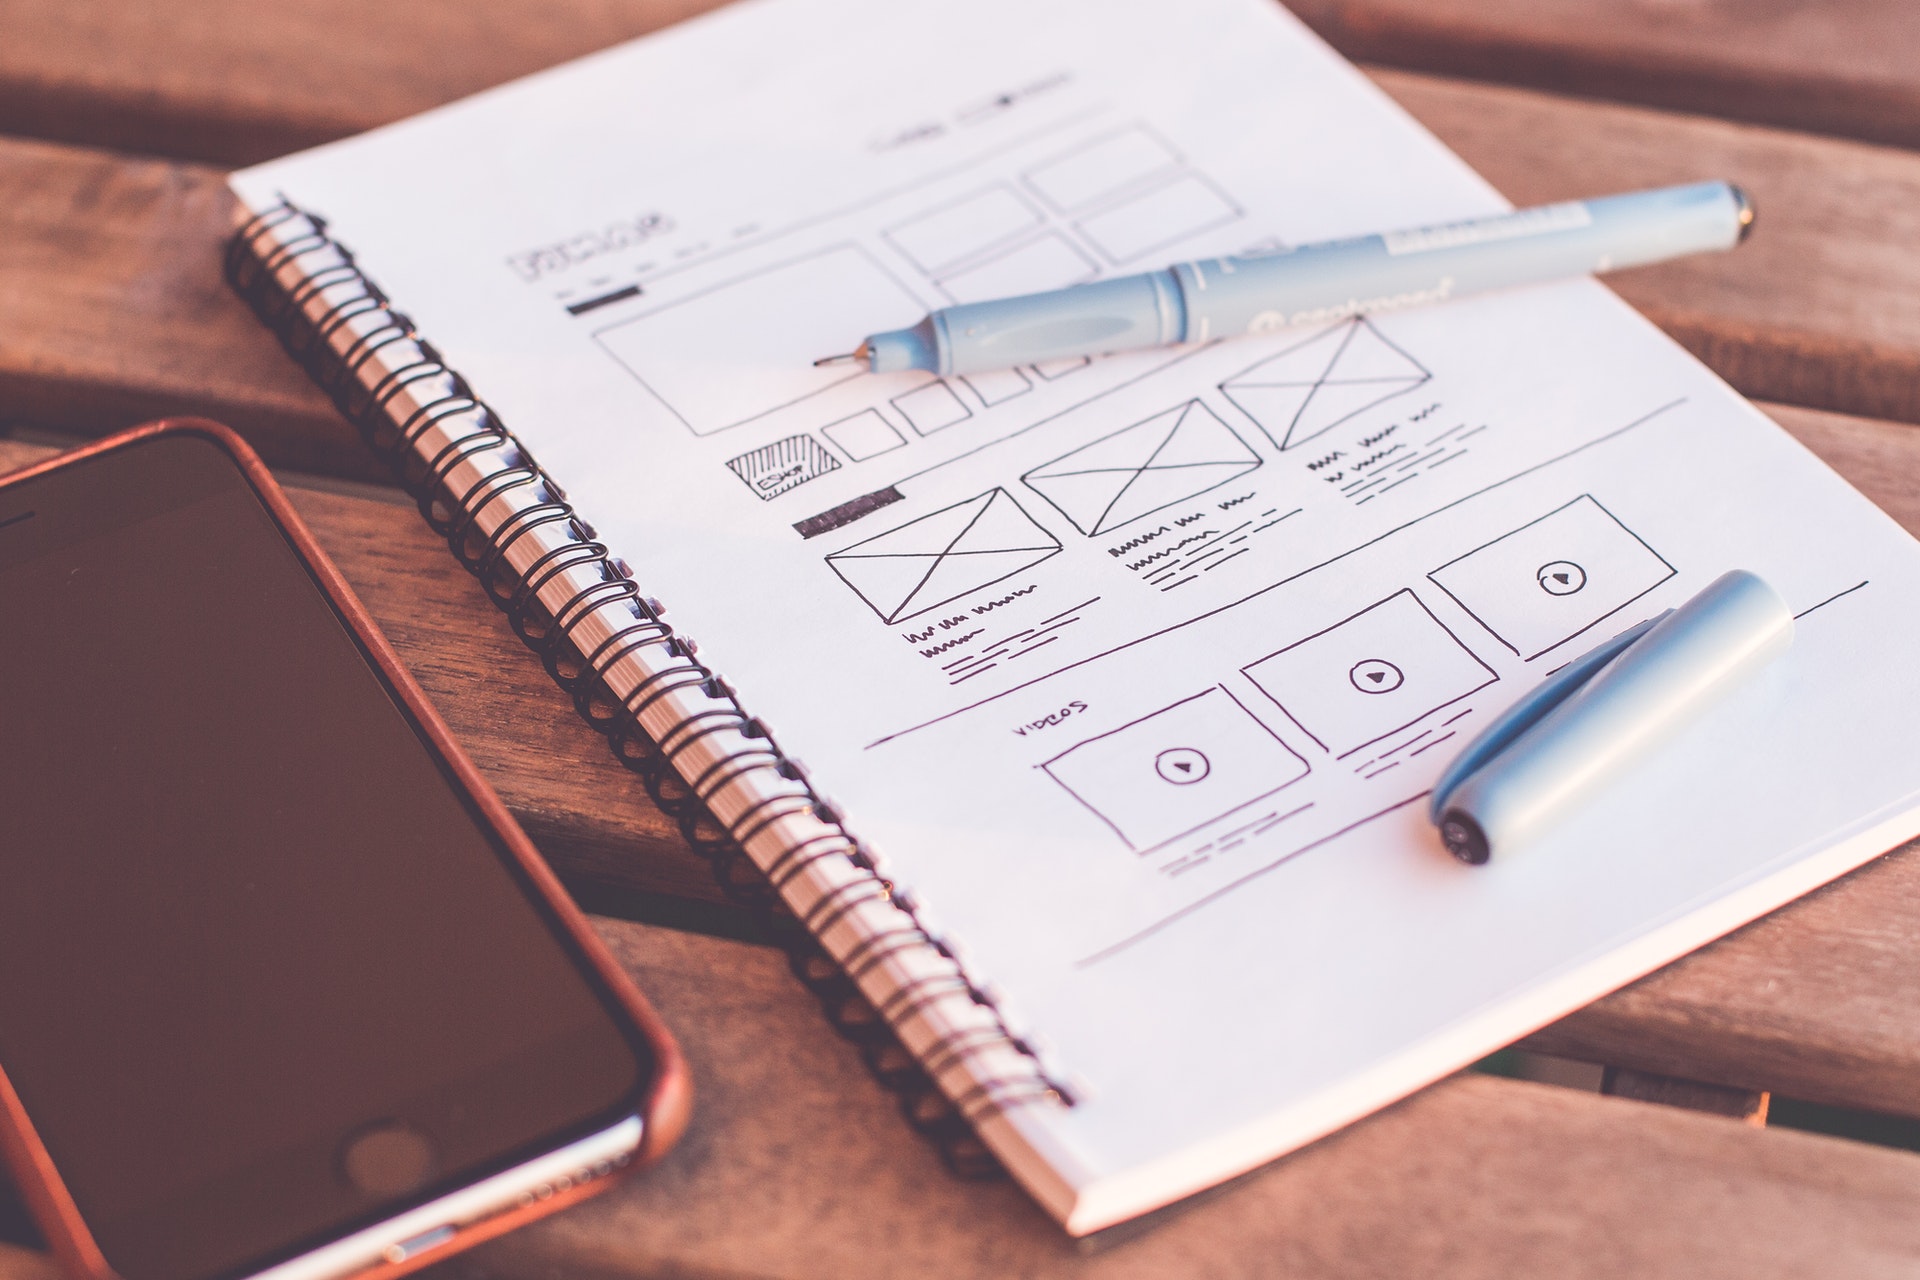 Everything you Want to Know About Atomic Design in UX Design